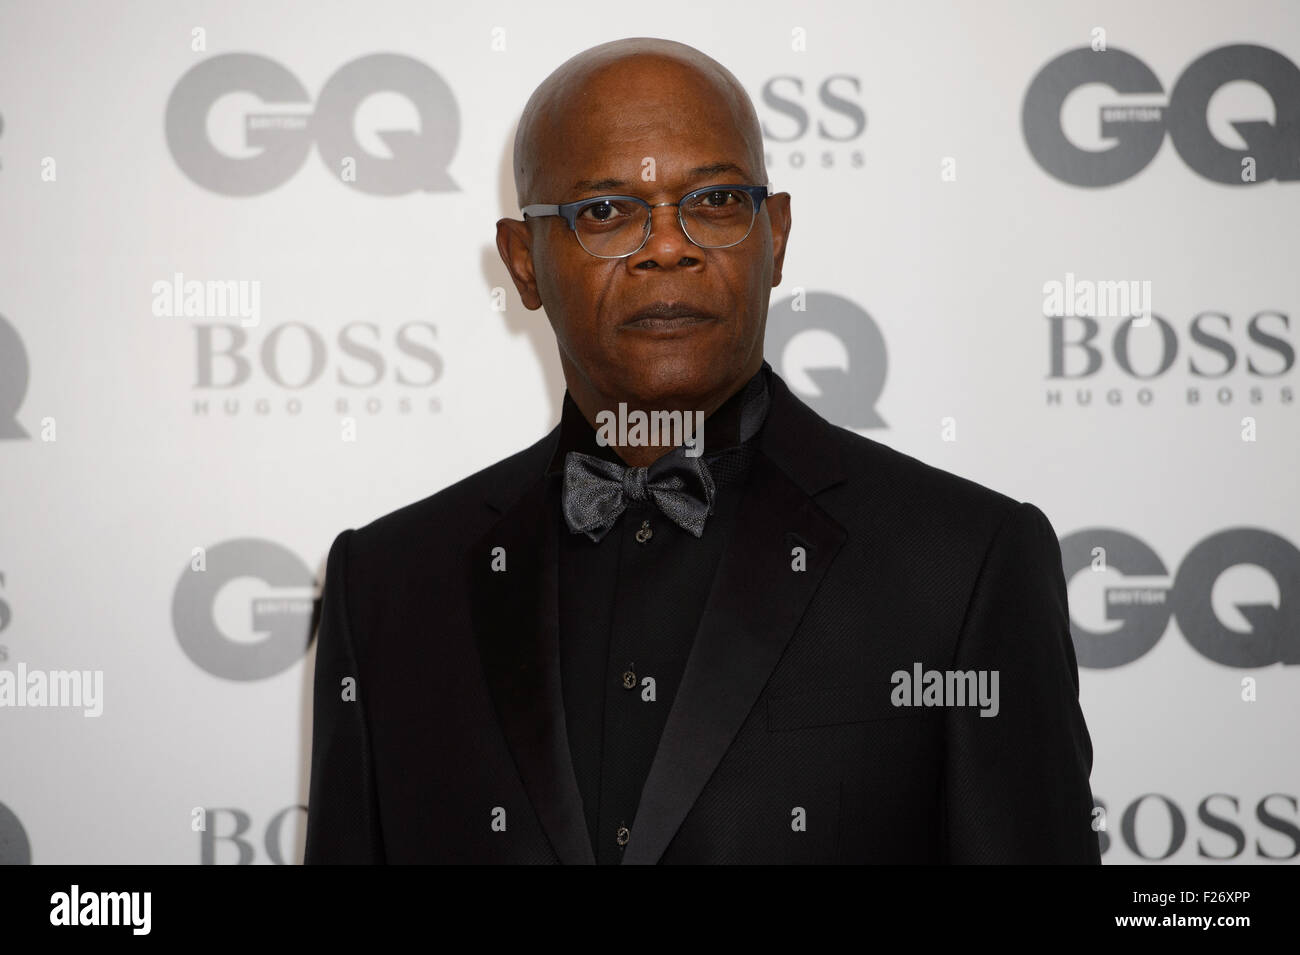 Samuel L Jackson at the GQ Men of the Year Awards 2015 Stock Photo